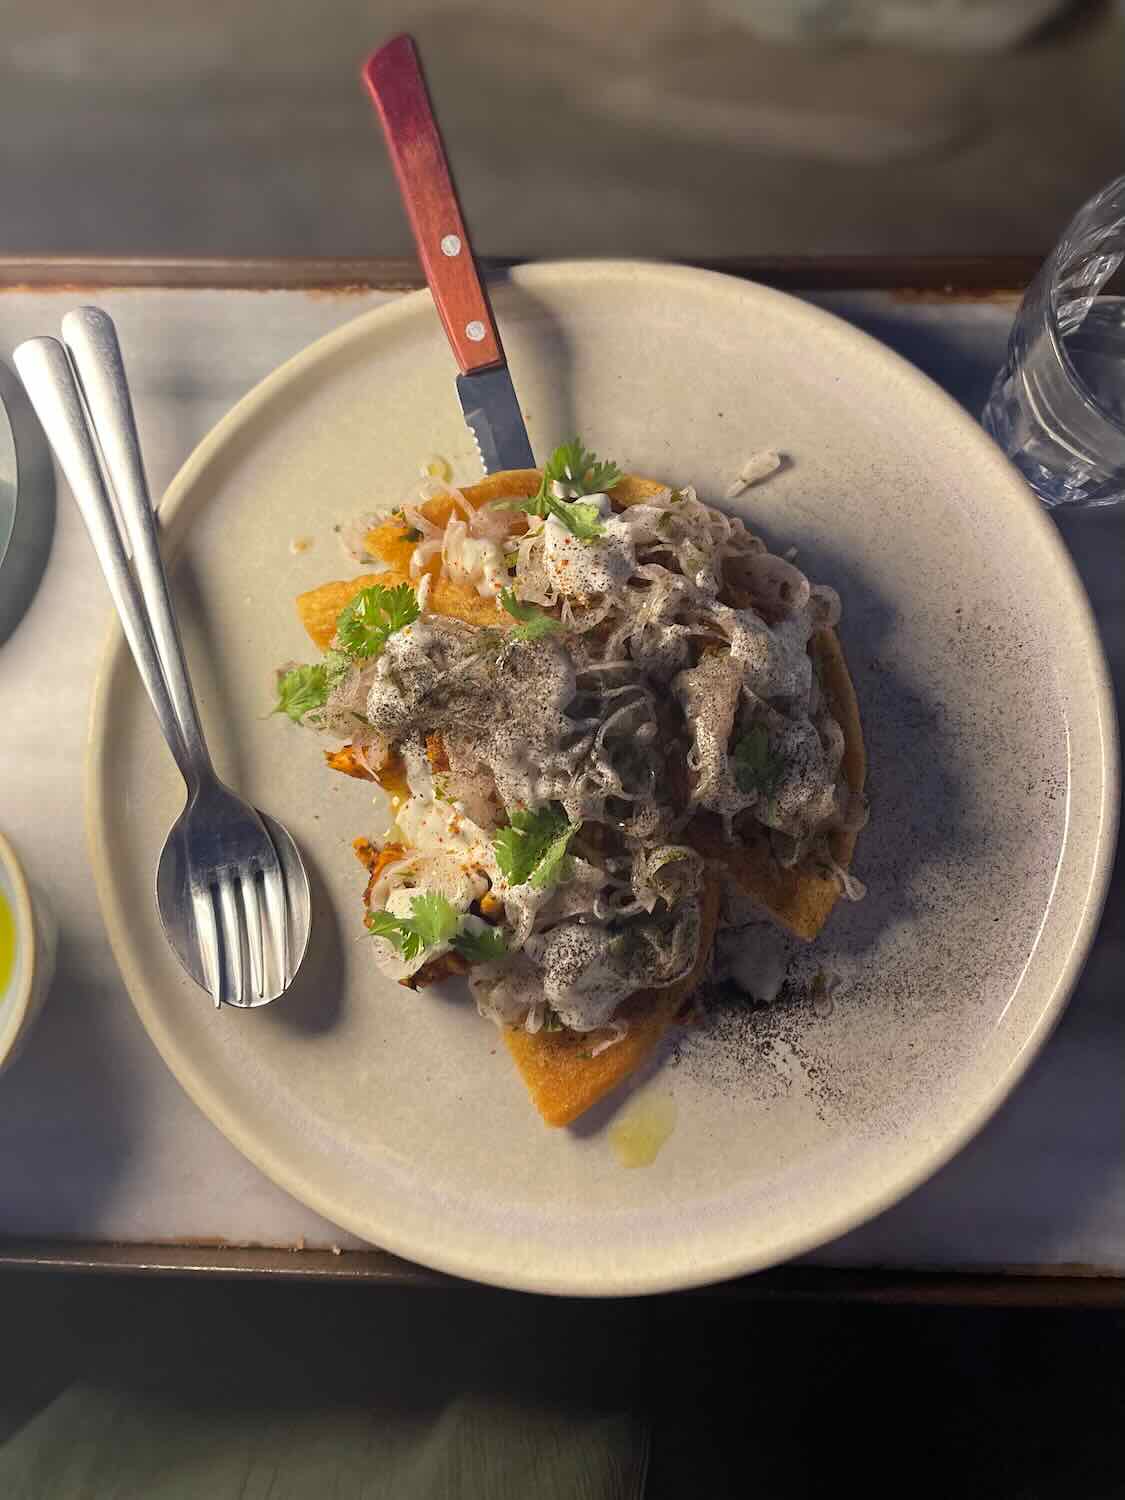 A savory local dish served in Sifnos, garnished with fresh herbs and a side of cutlery, reflecting the island's gastronomic offerings